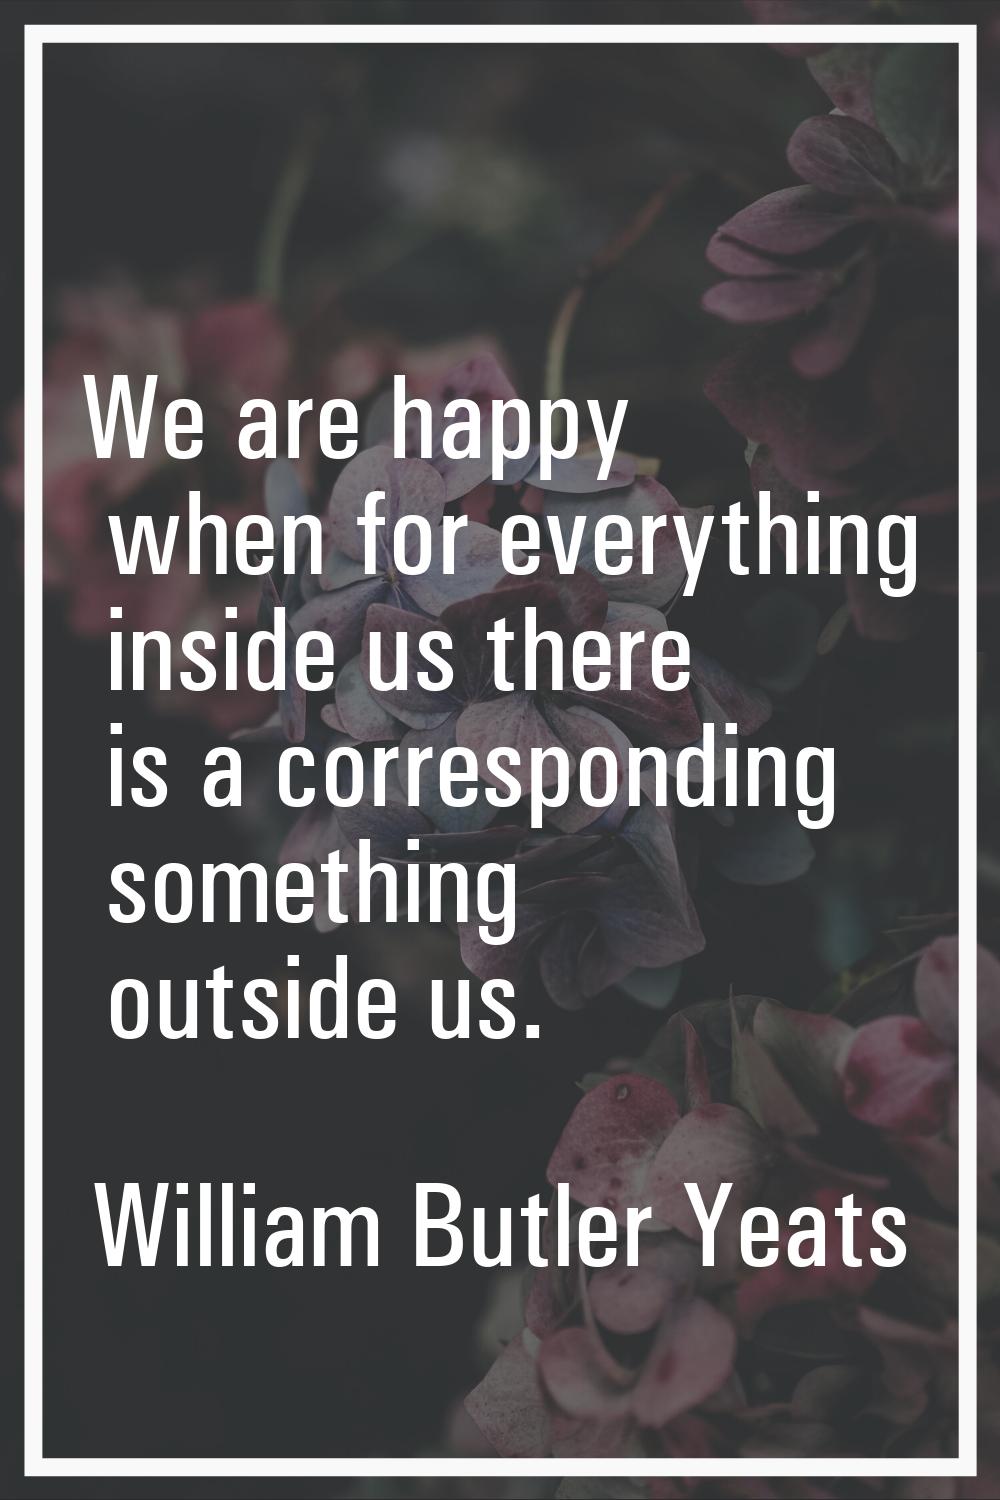 We are happy when for everything inside us there is a corresponding something outside us.